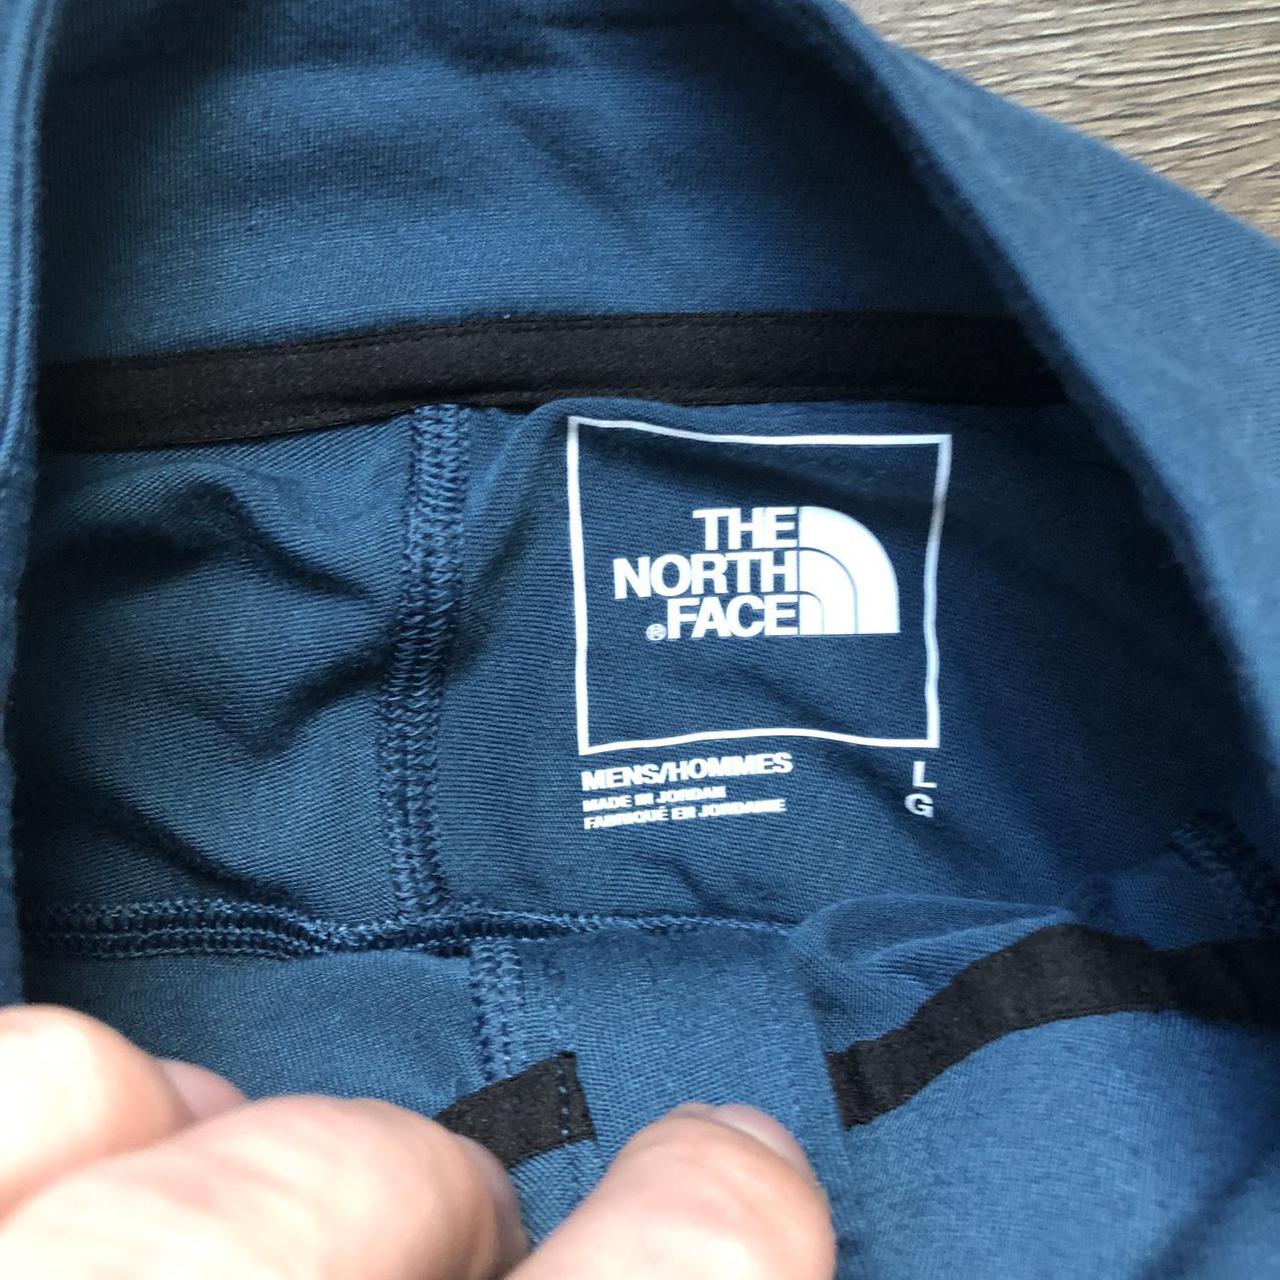 Product Image 2 - 🔥🏃THE NORTH FACE LONGSLEEVE🏃🔥
-Blue north